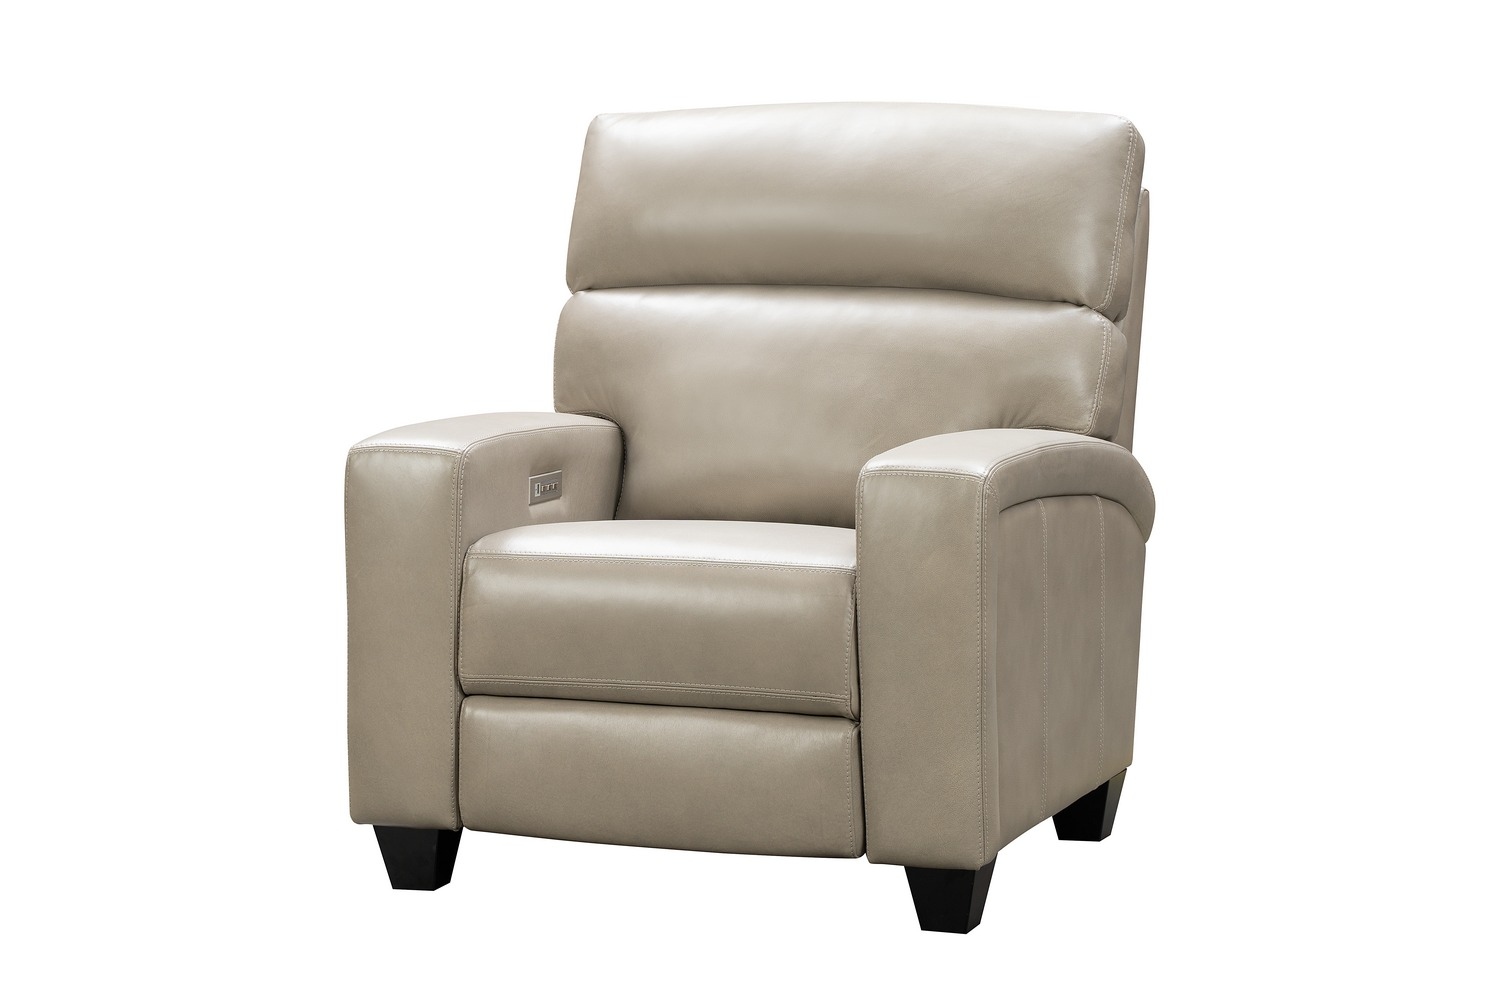 Barcalounger Marcello Power Recliner Chair with Power Head Rest and Power Lumbar - Sergi Gray Beige/Leather Match